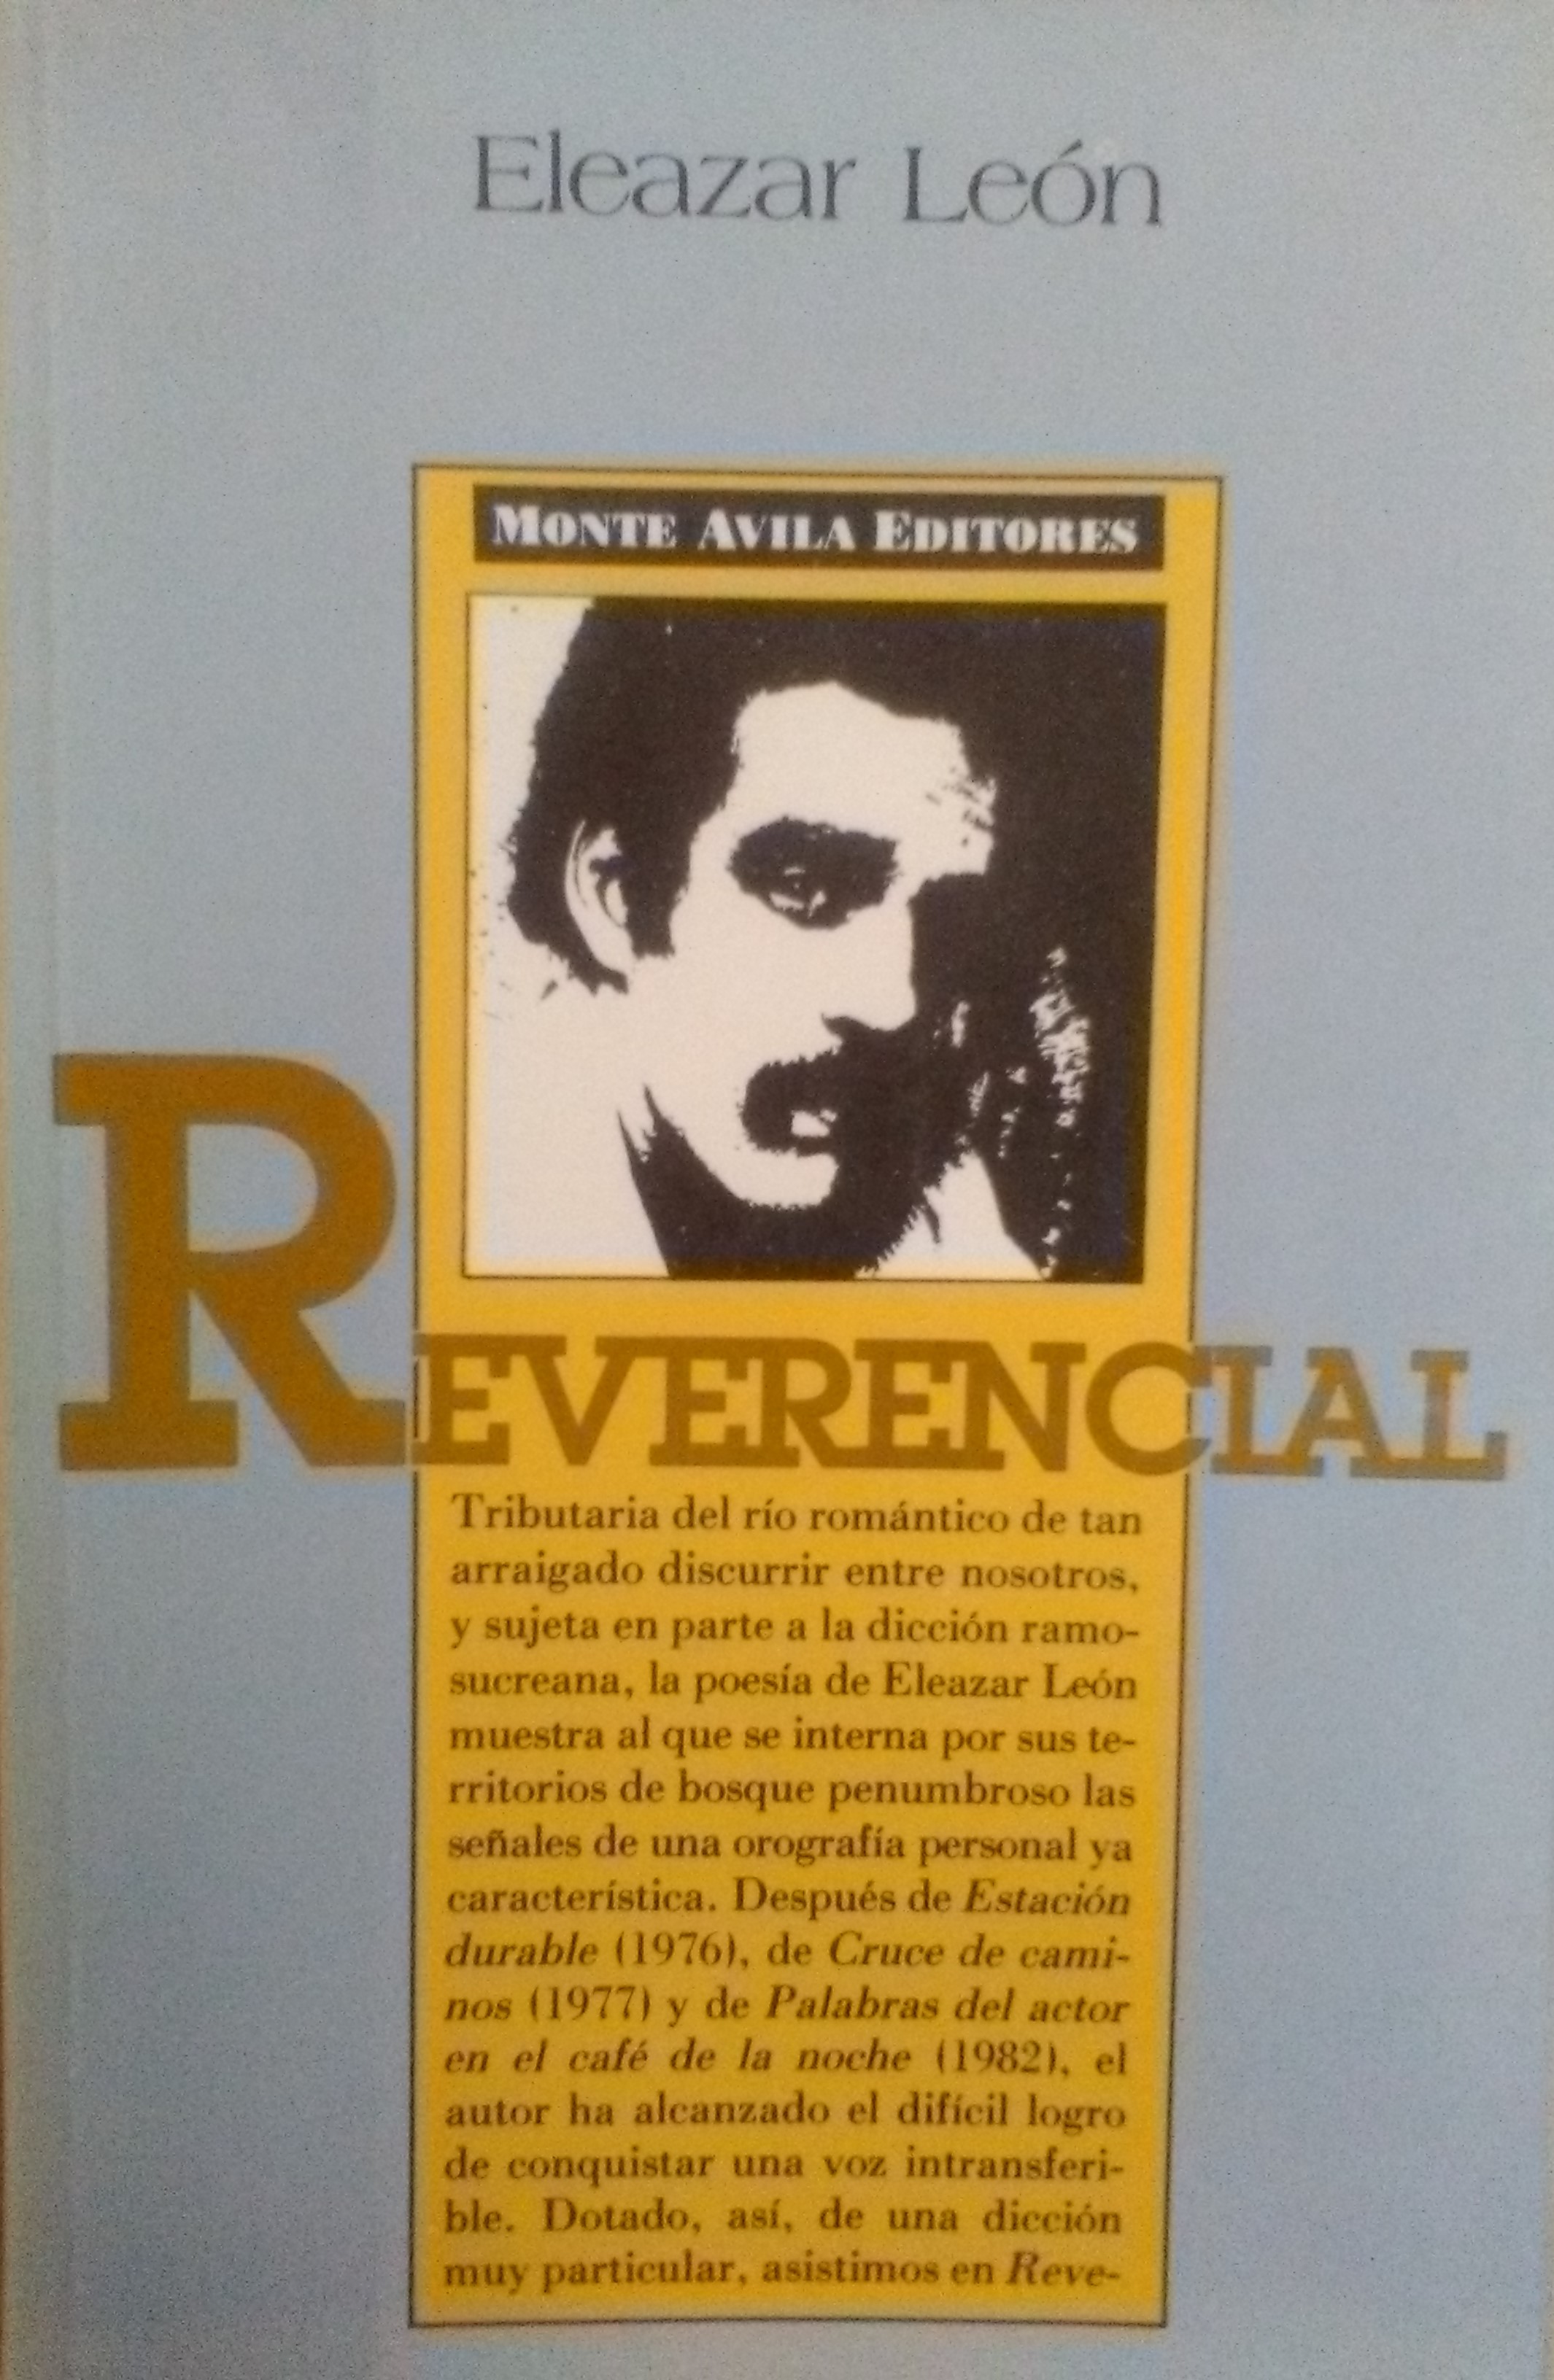 Reverencial